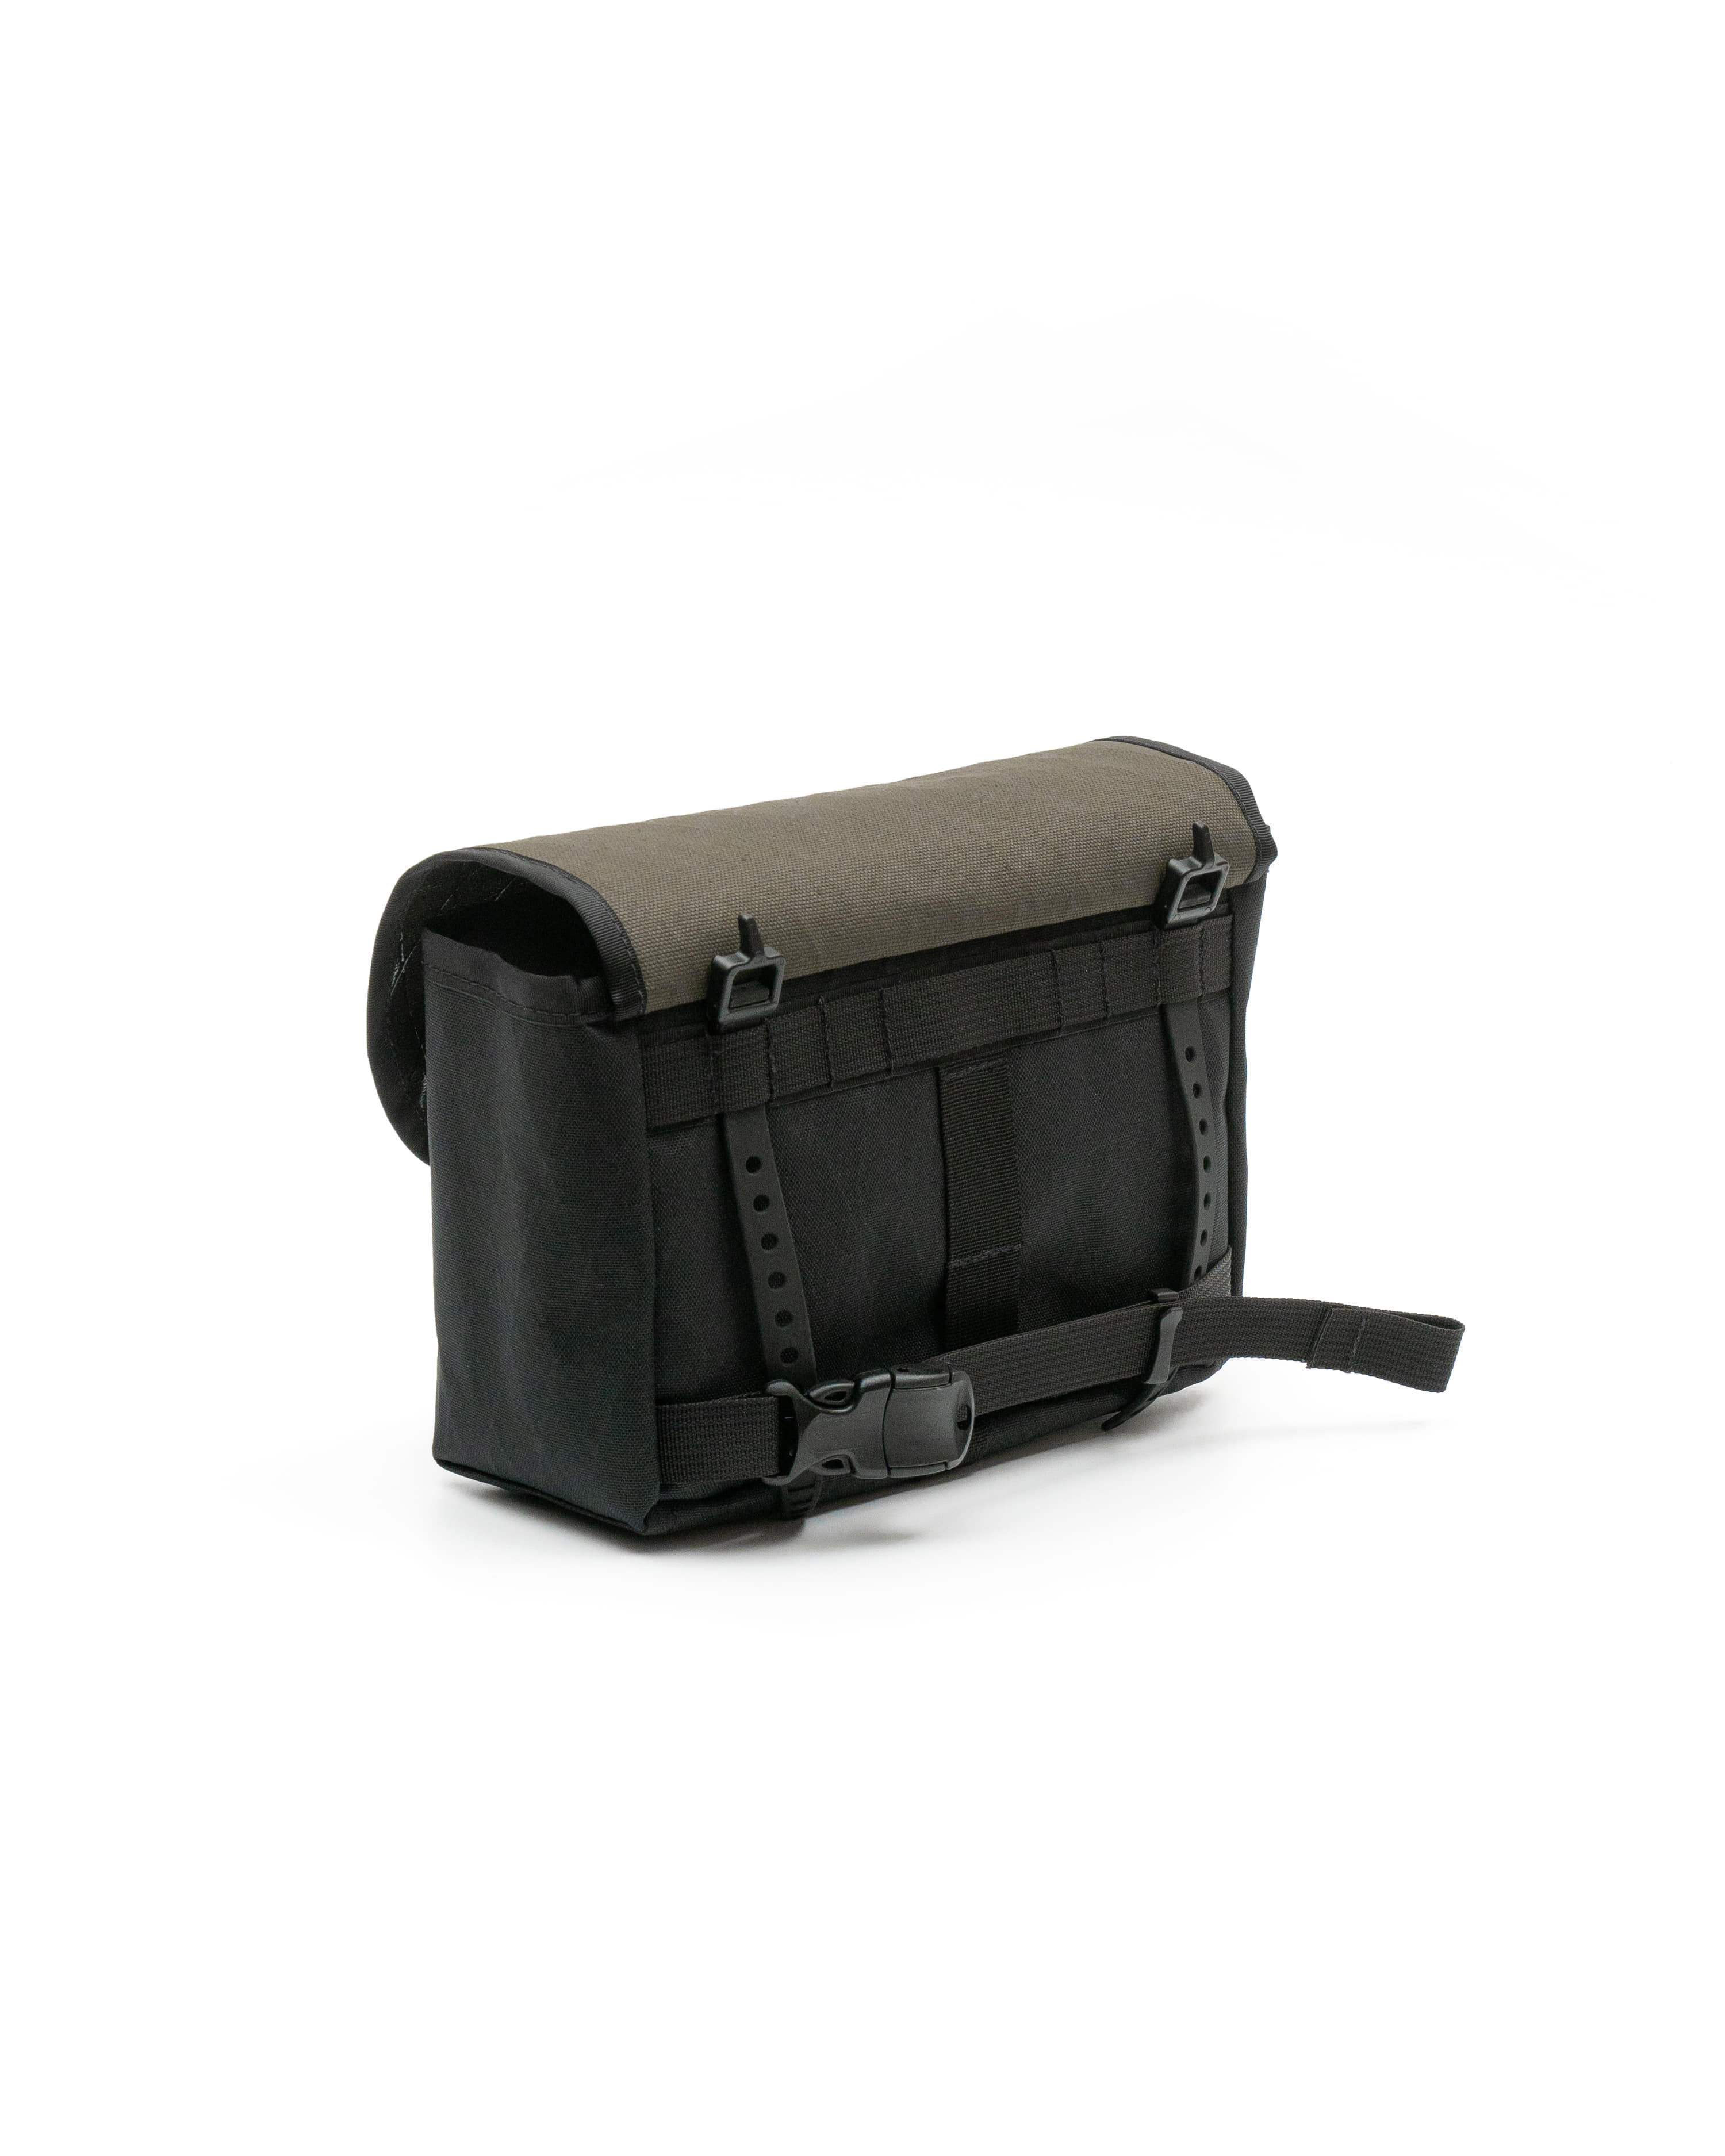 [out of stock] HITCHKAWA The Dolores bag (X11)